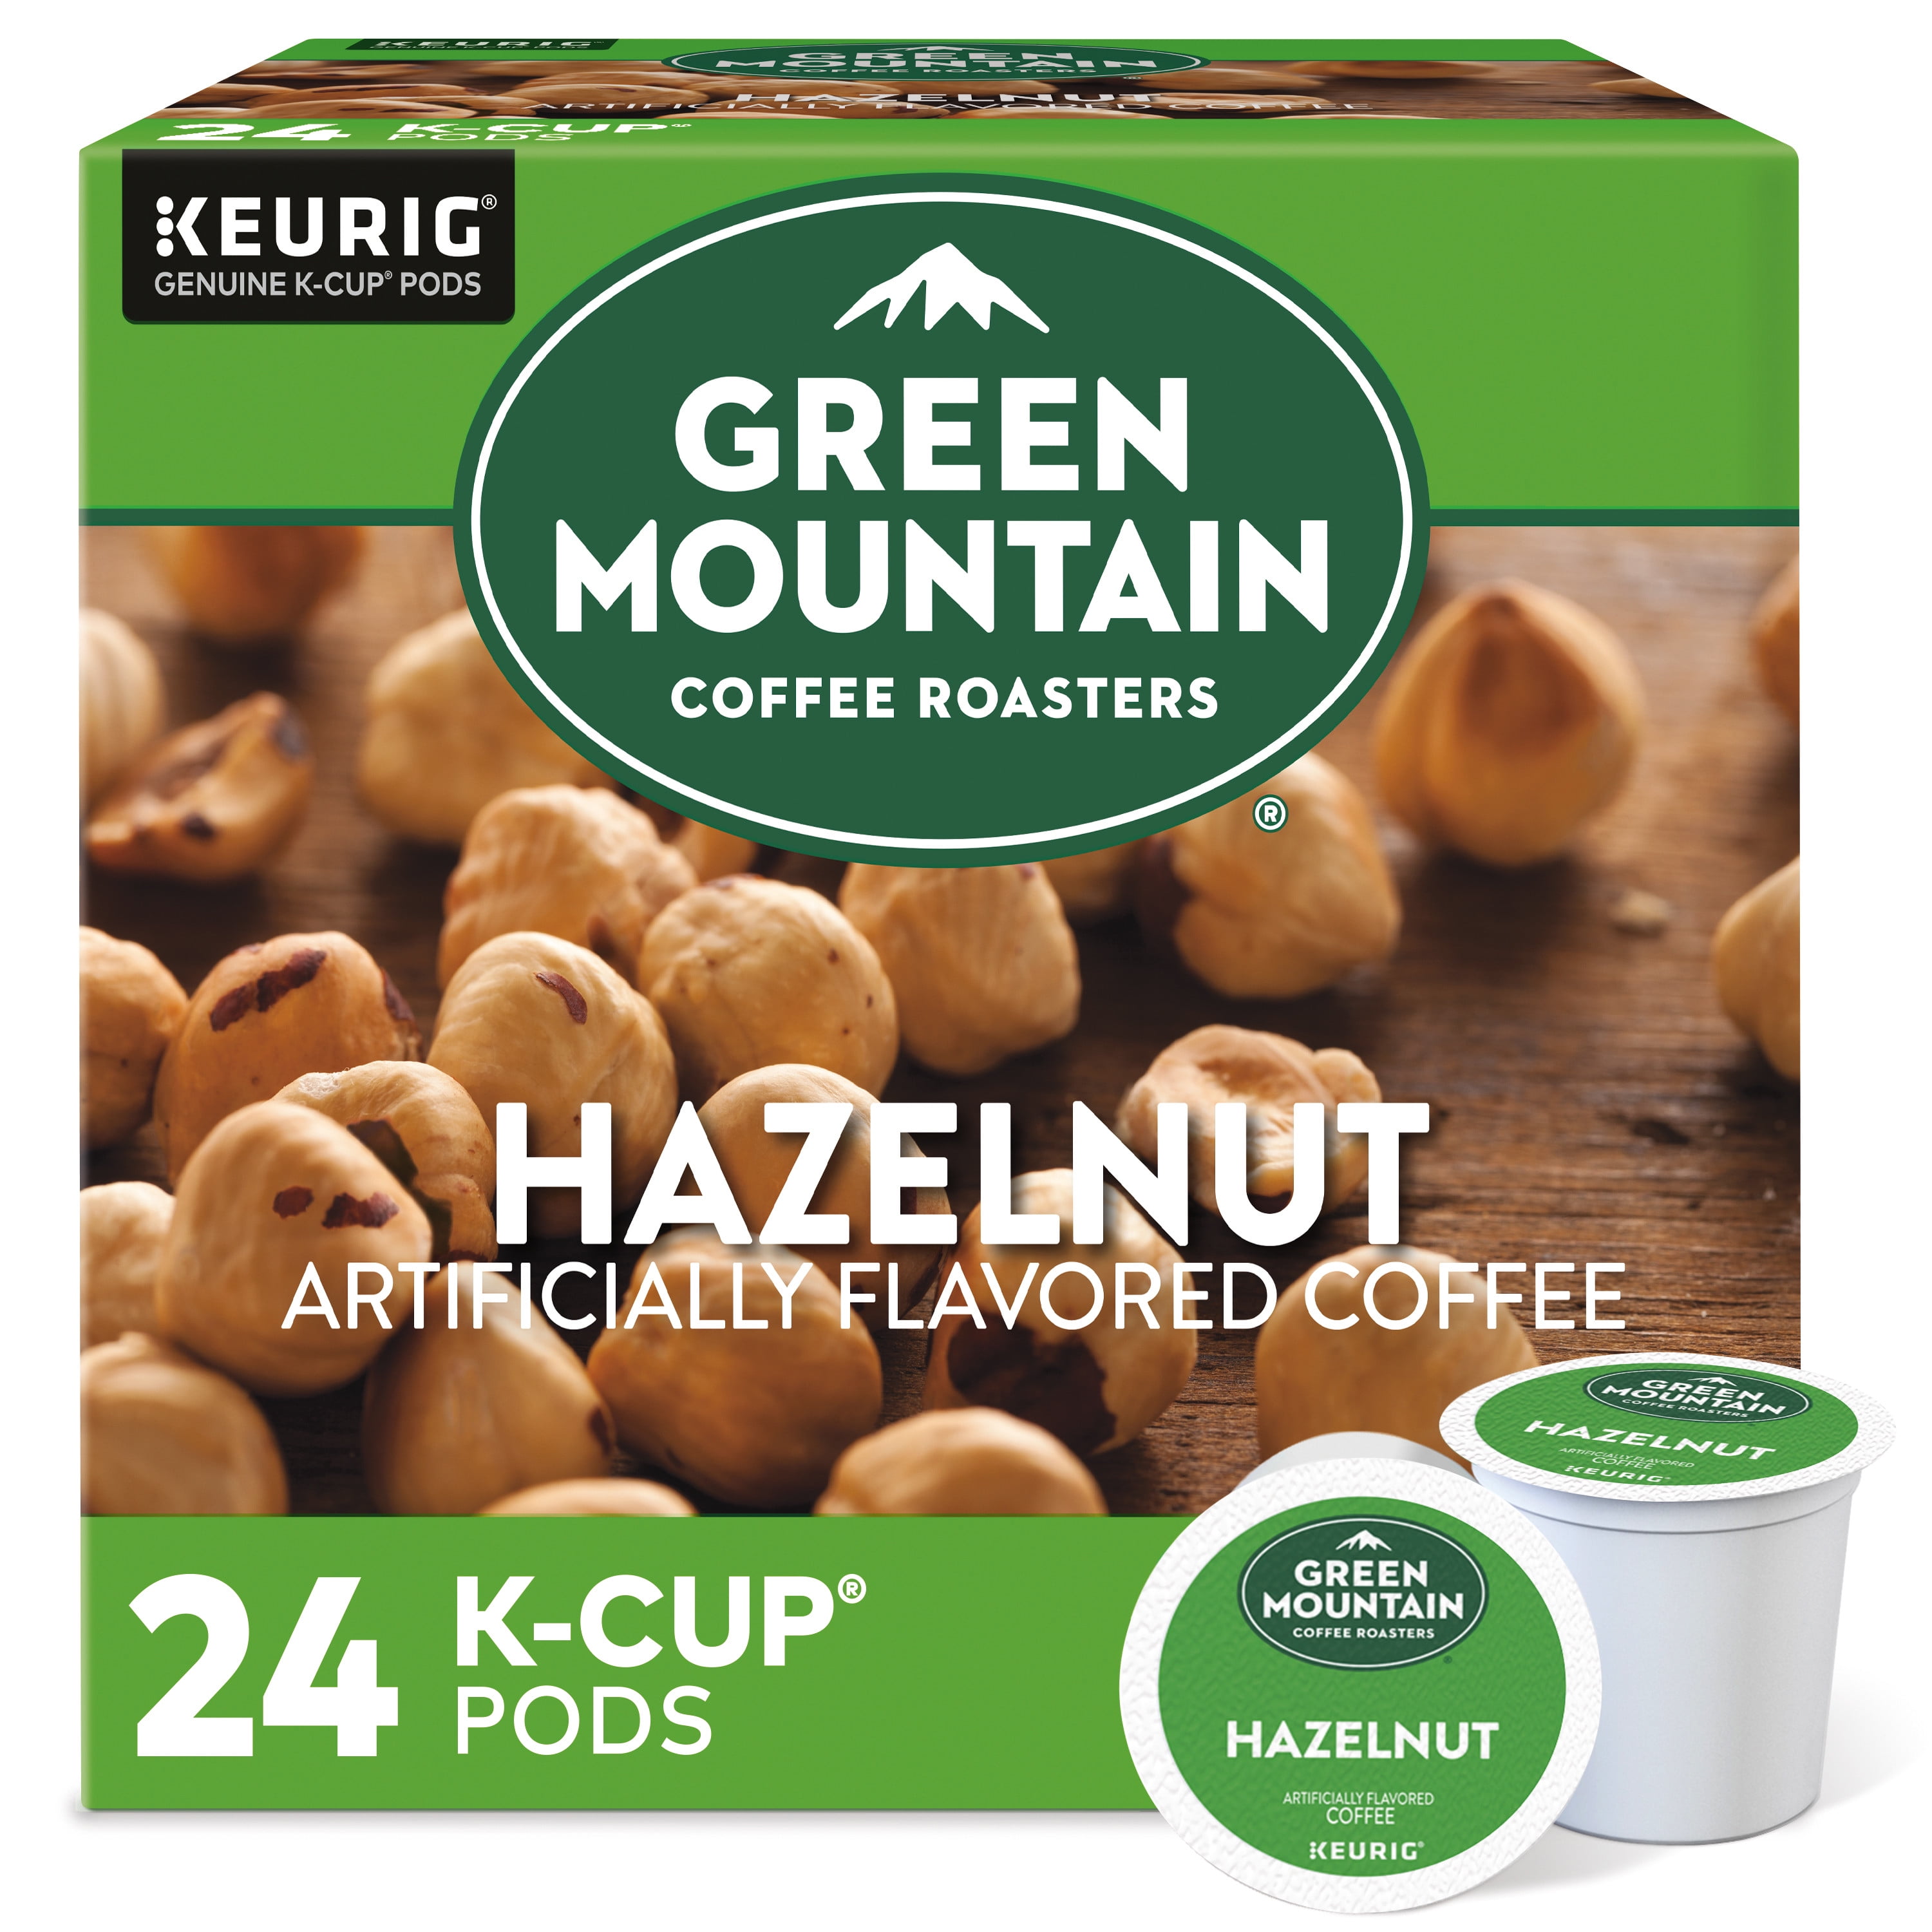 Green Mountain Coffee Hazelnut Flavored K-Cup Pods, Light Roast, 24 Count for Keurig Brewers